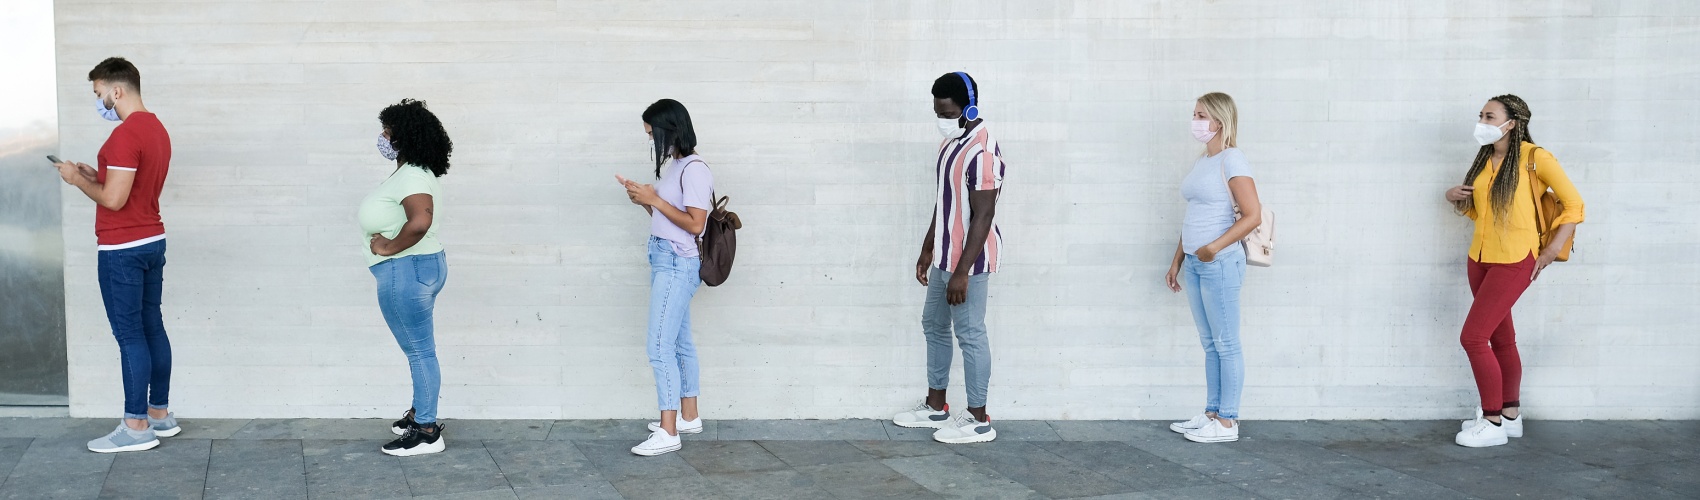 Multiracial people standing in a queue and waiting - Young people with social distancing and wearing protective face masks - Concept of the new normality and social distancing